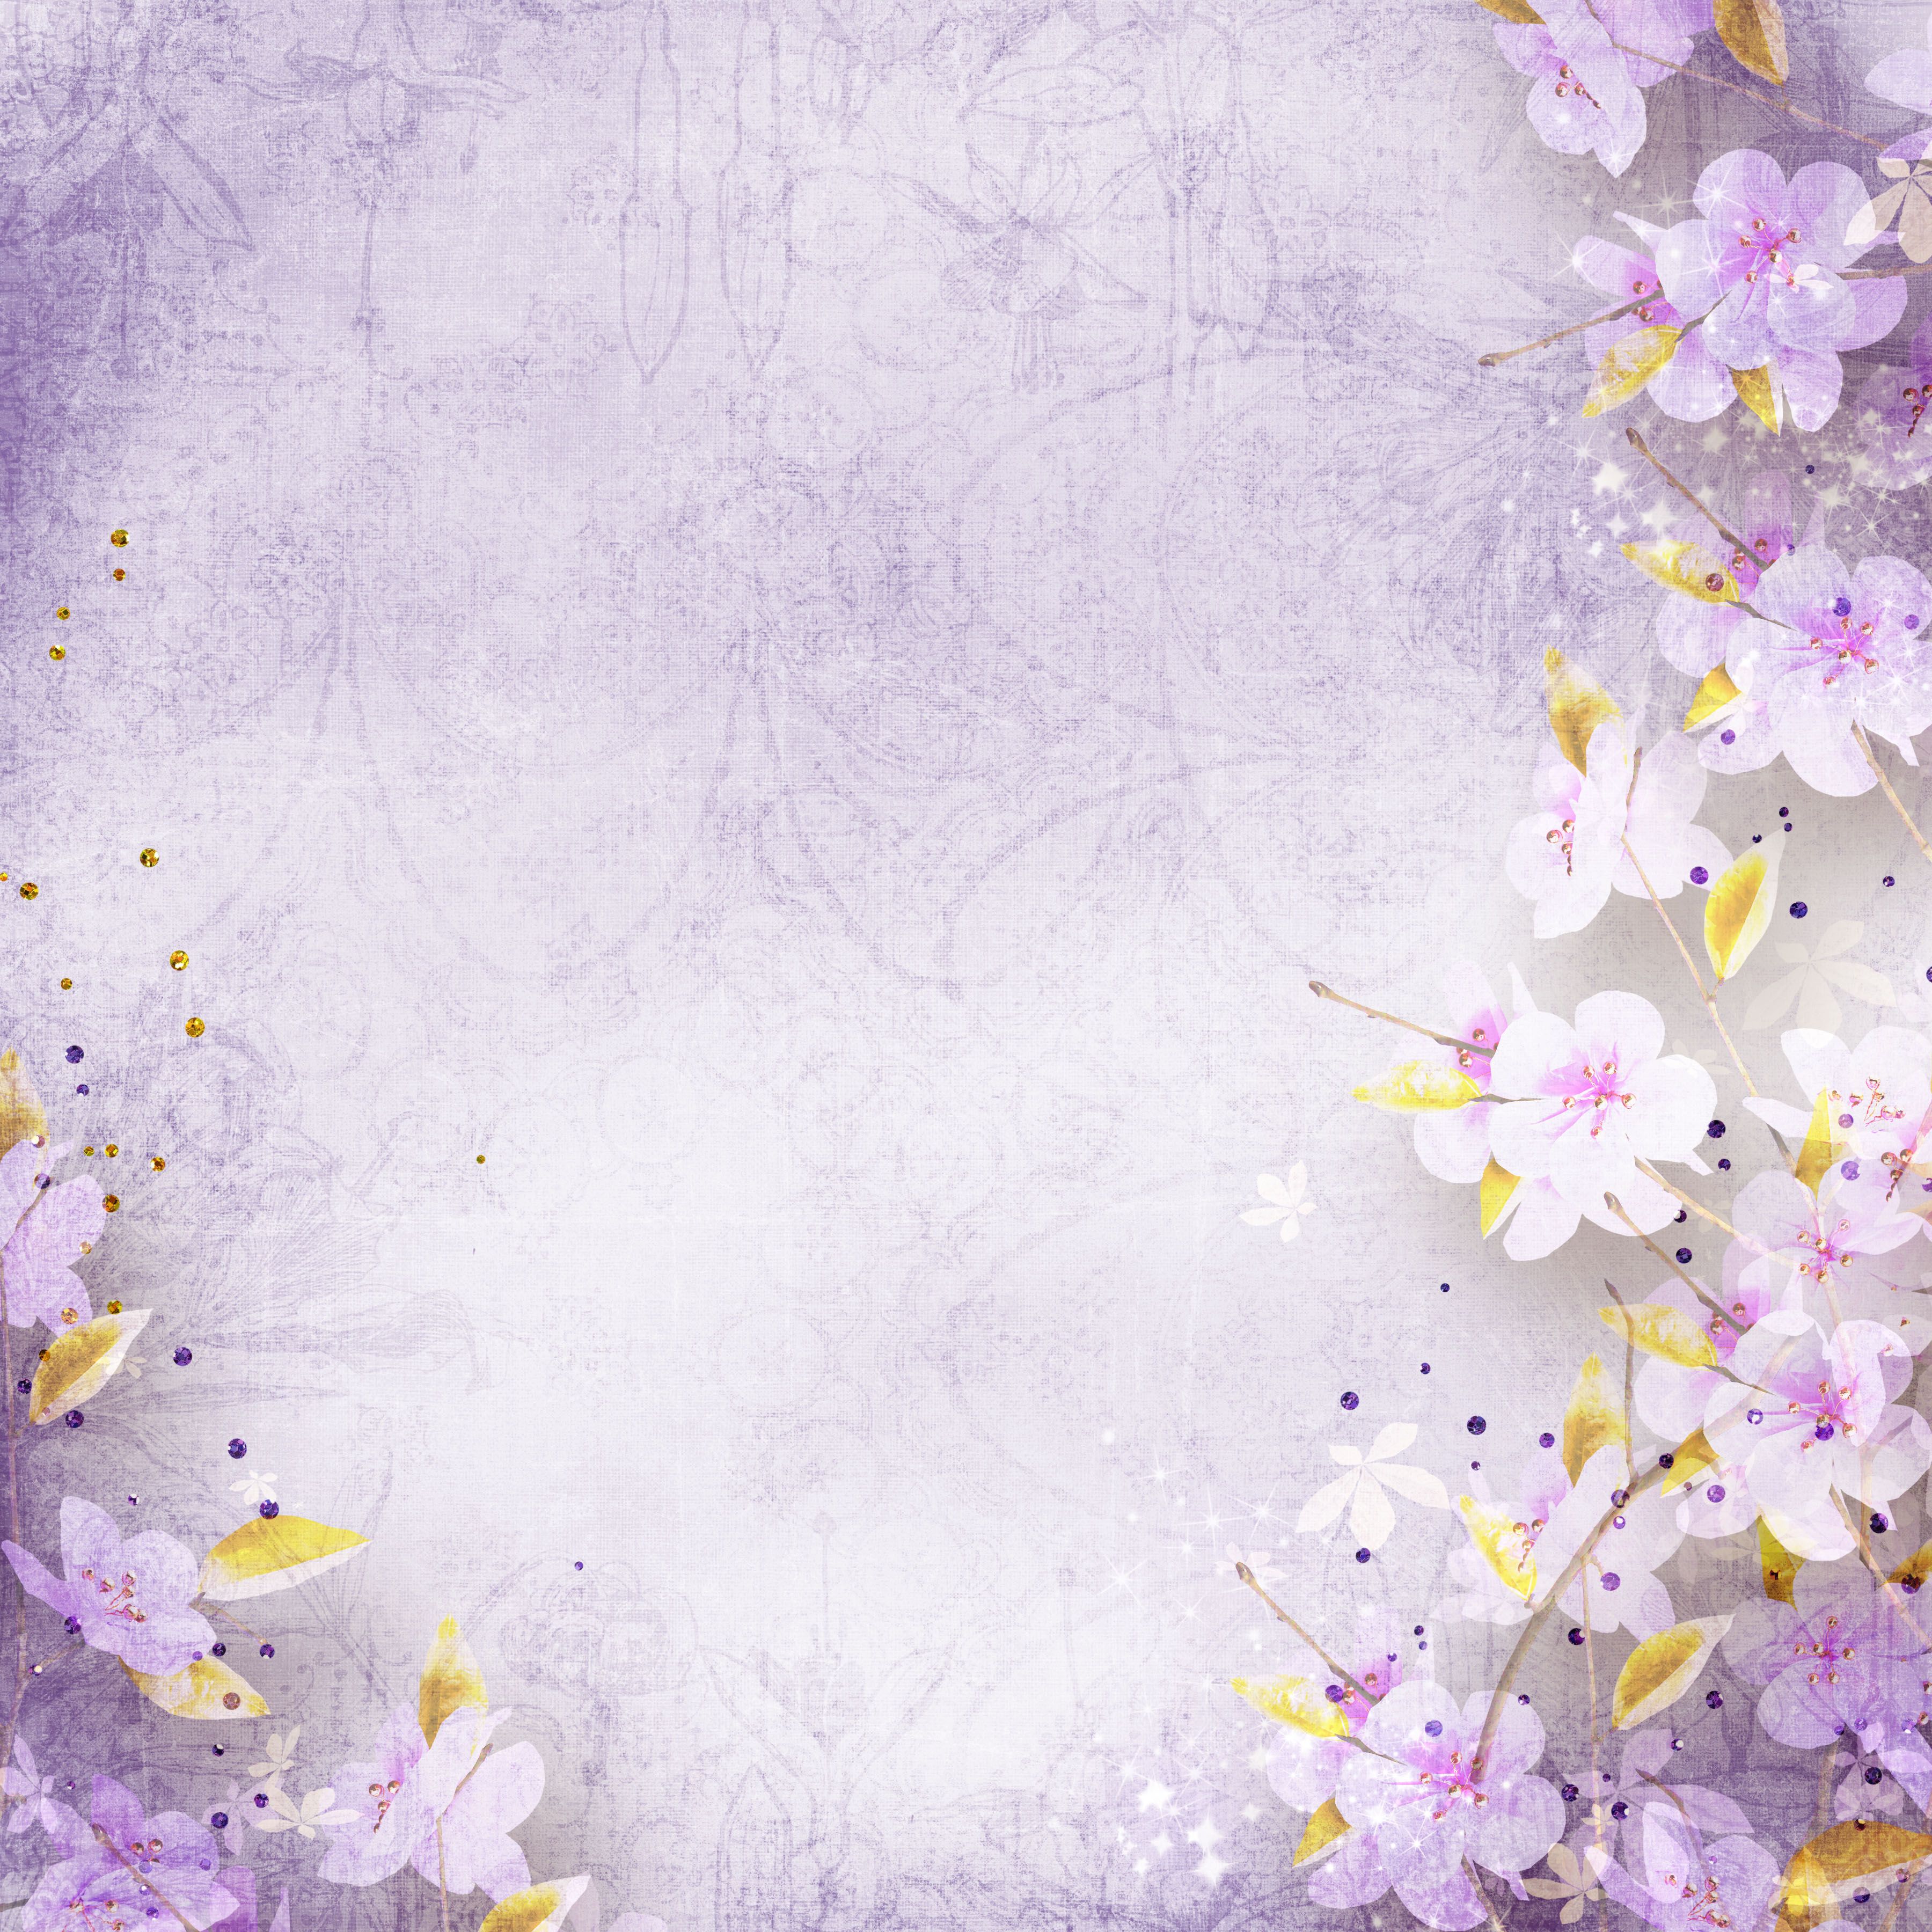 VC_VioletFeelings_Paper4.jpg | Flower backgrounds, Flower and Decoupage